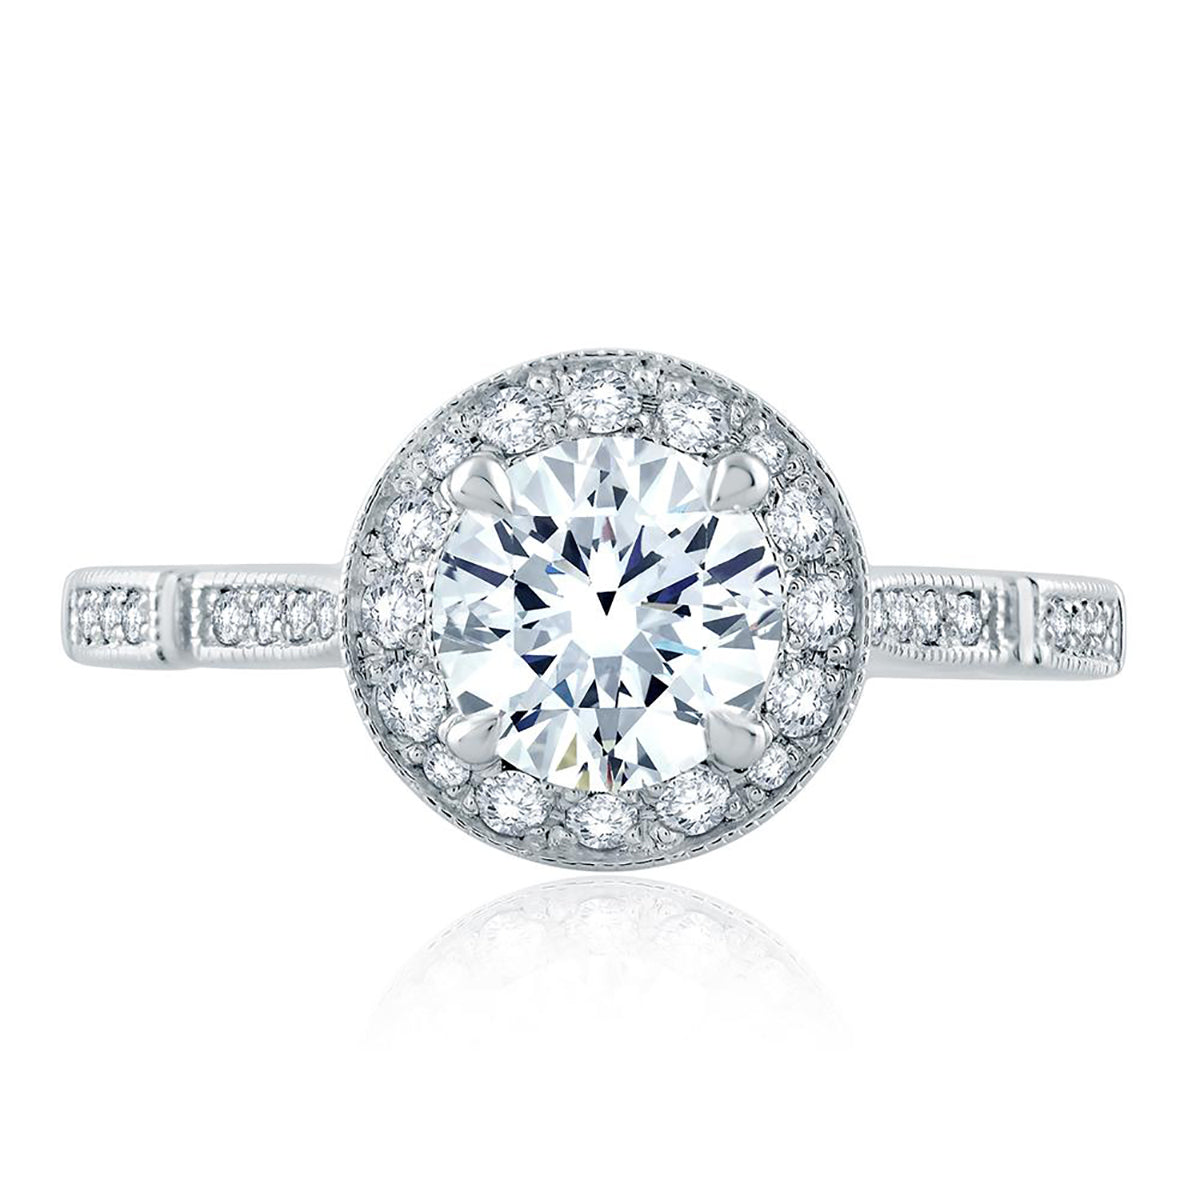 A.Jaffe Modern Vintage Ornate Gallery and Shank Detail Round Halo Diamond Engagement Ring ME2189Q/128